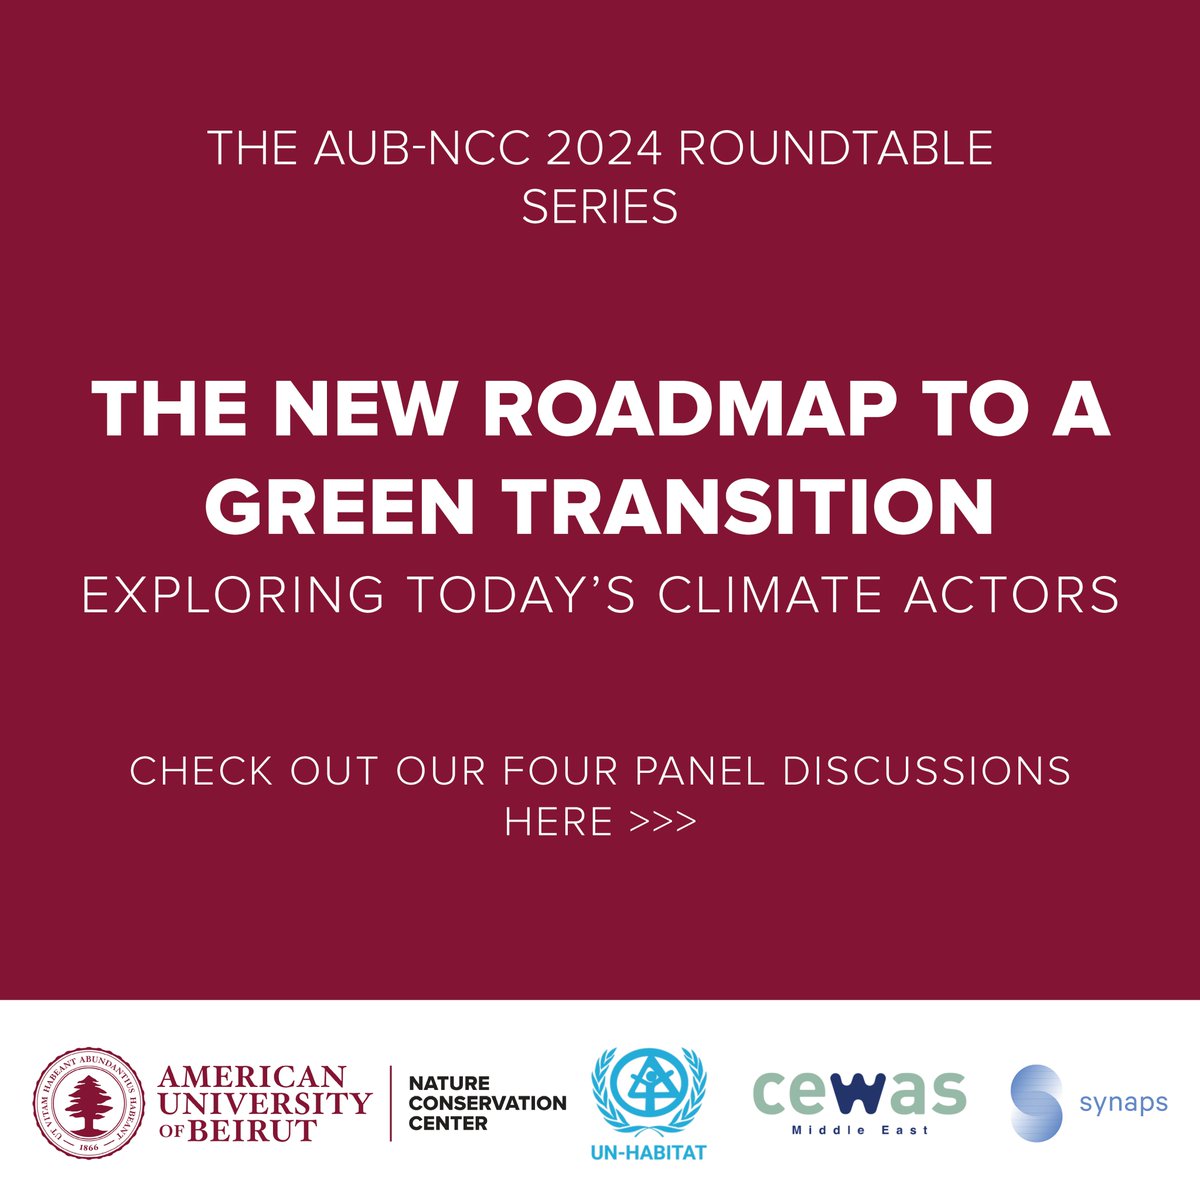 AUB-NCC’s #roundtable series will now be an annual event📷 We selected “The New Roadmap to a #GreenTransition: Exploring Today’s Climate Actors” as a theme for 2024.